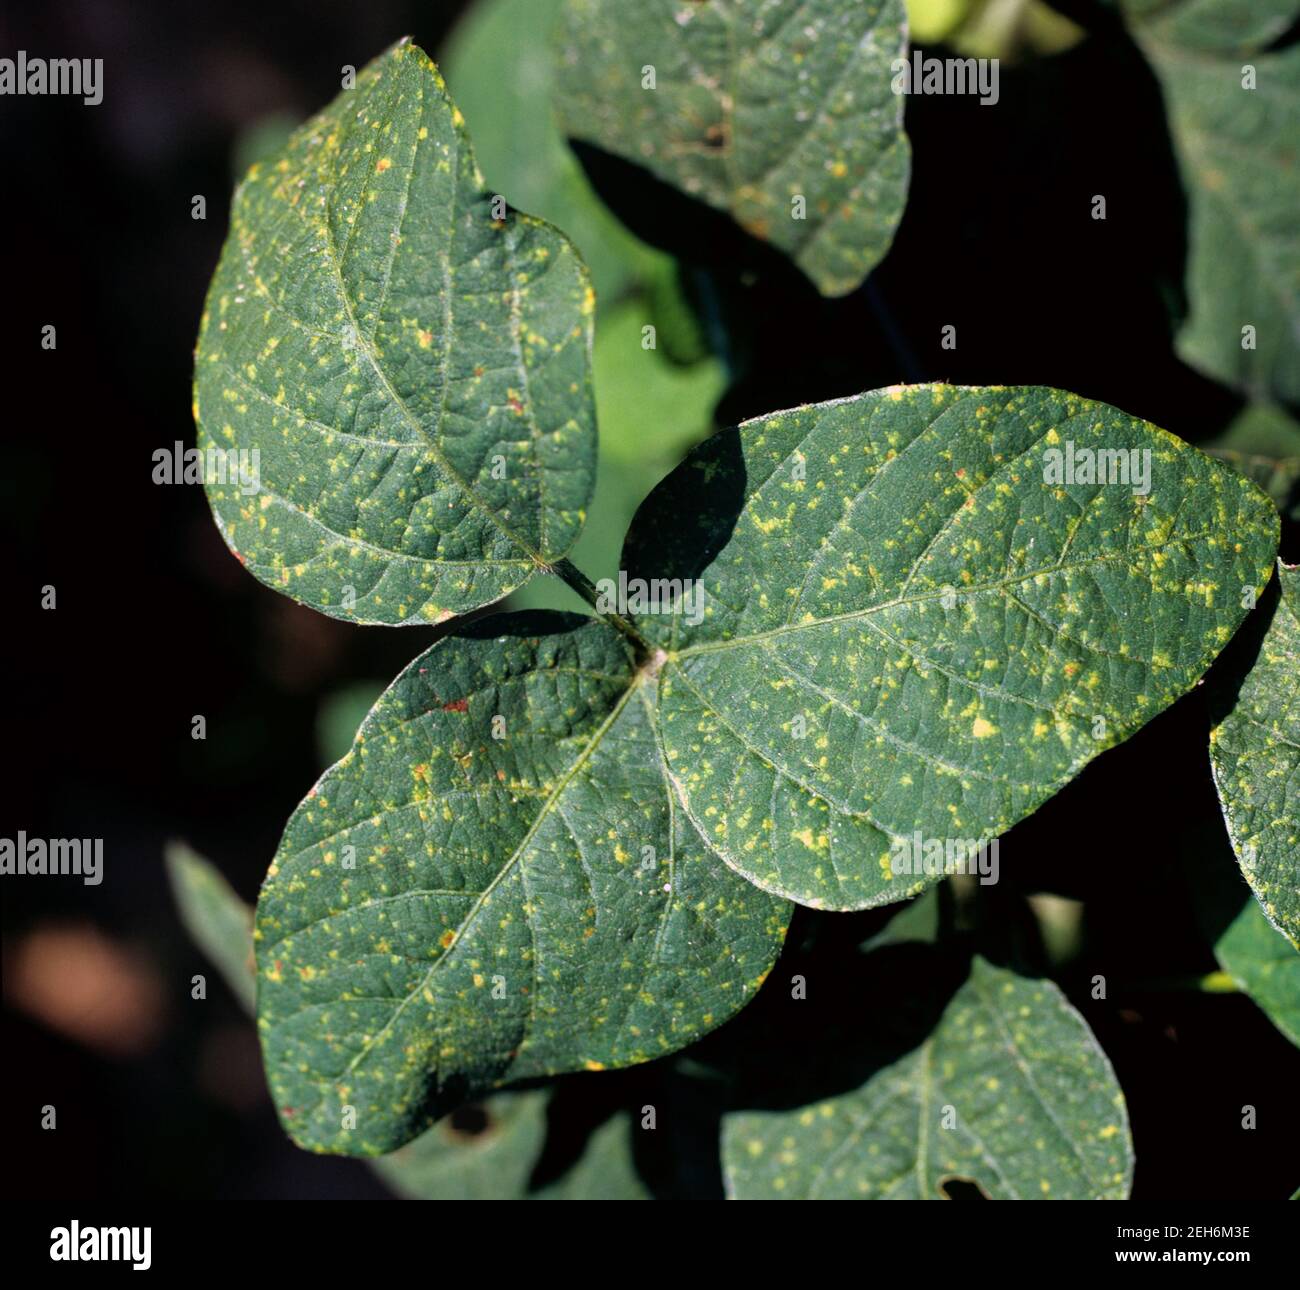 Downy mildew (Peronospora manshurica) disease lesions on on the upper surface of a soyabean leaf, Thailand Stock Photo